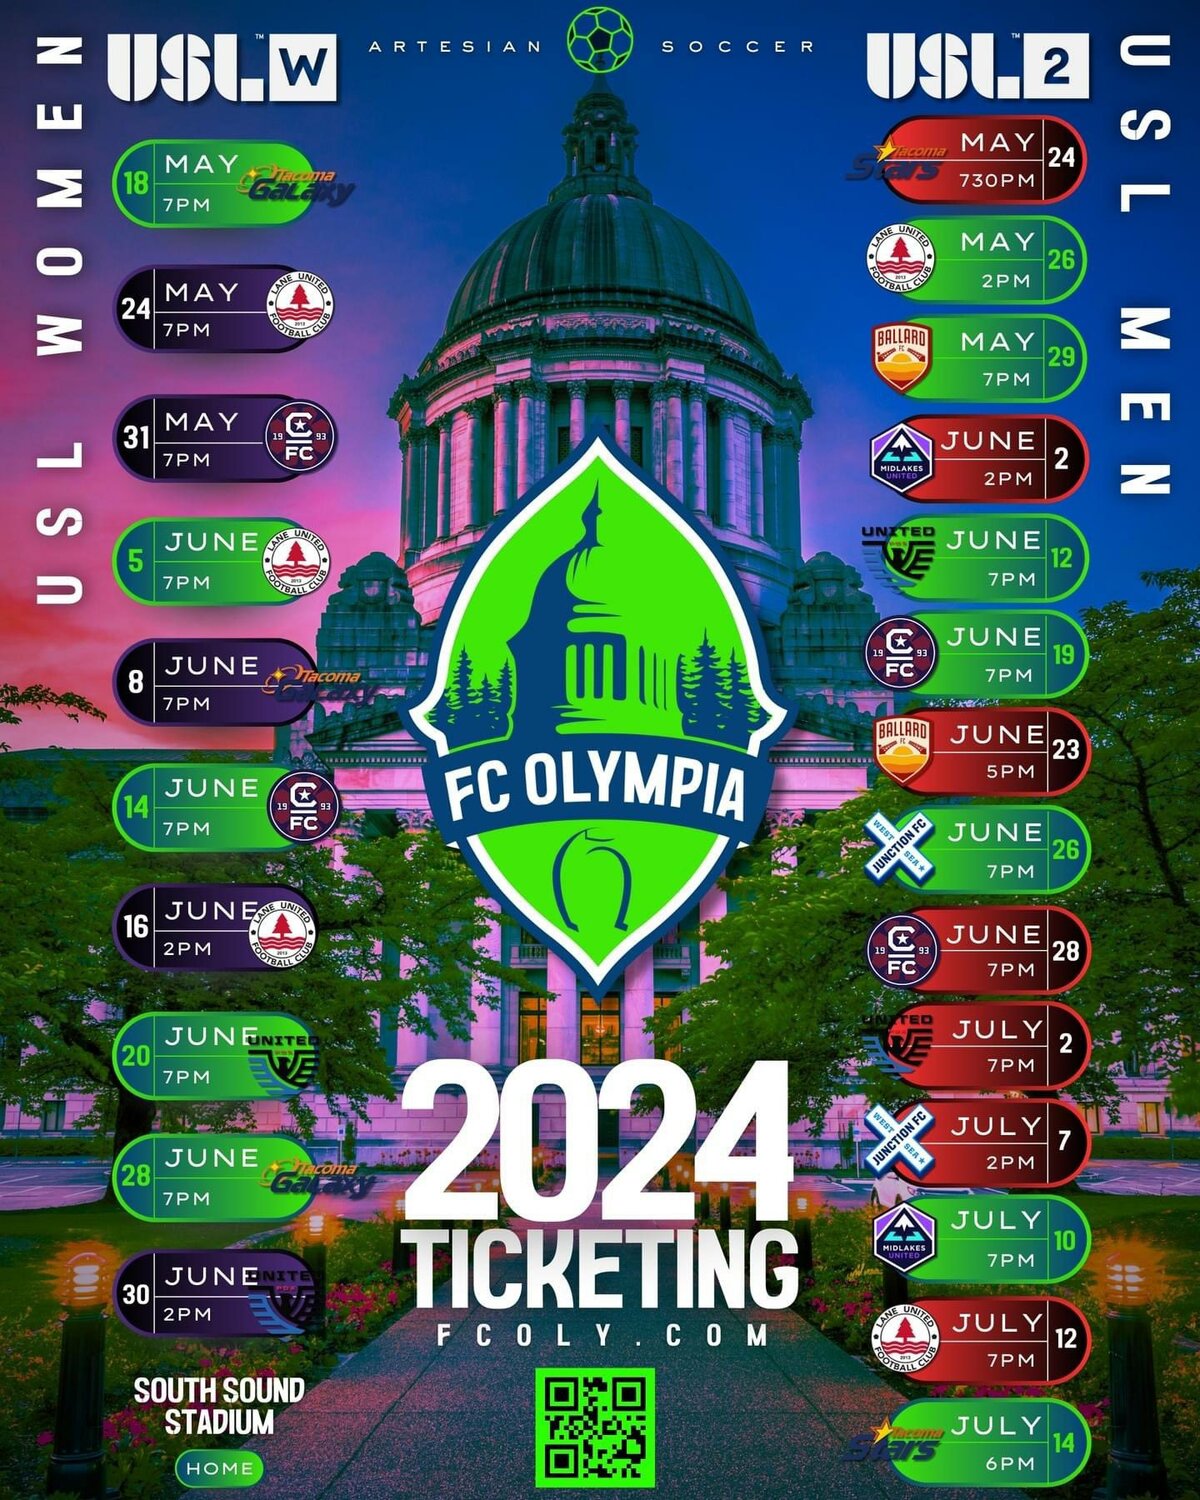 FC Olympia's USL2 and USLW fixtures for the 2024 season.